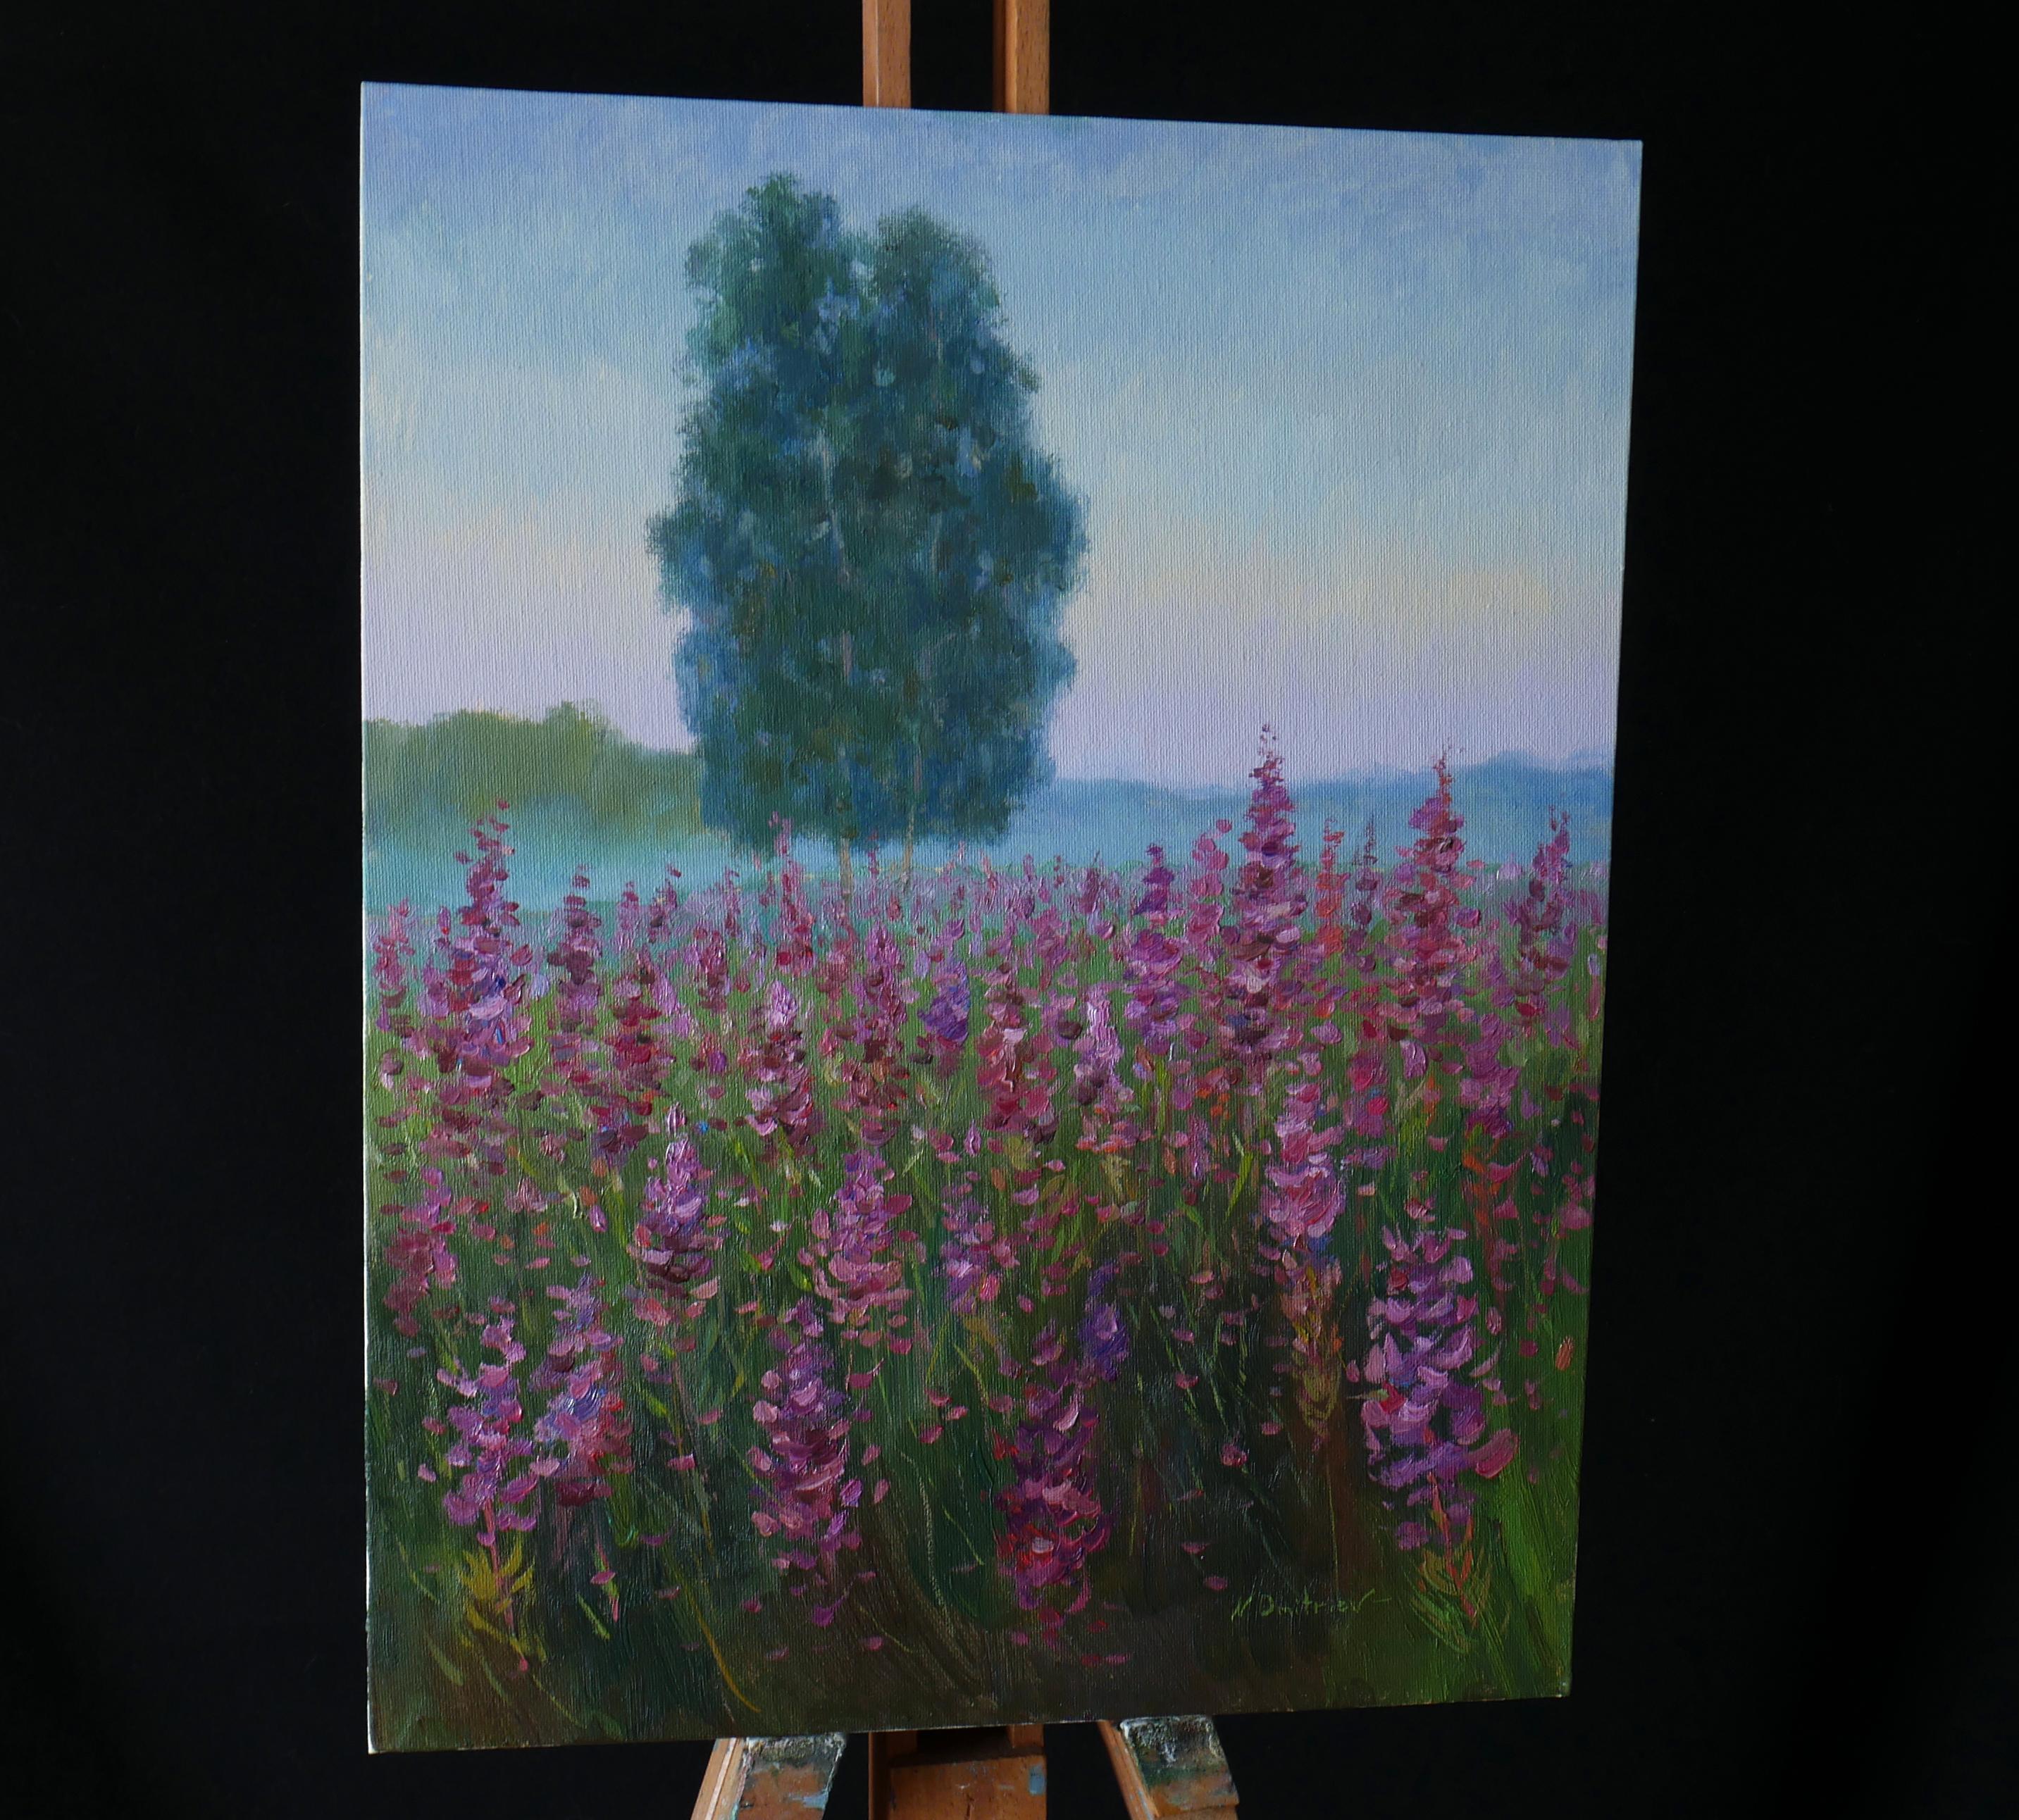 The Morning Over The Fireweed Field - summer landscape painting - Painting by Nikolay Dmitriev